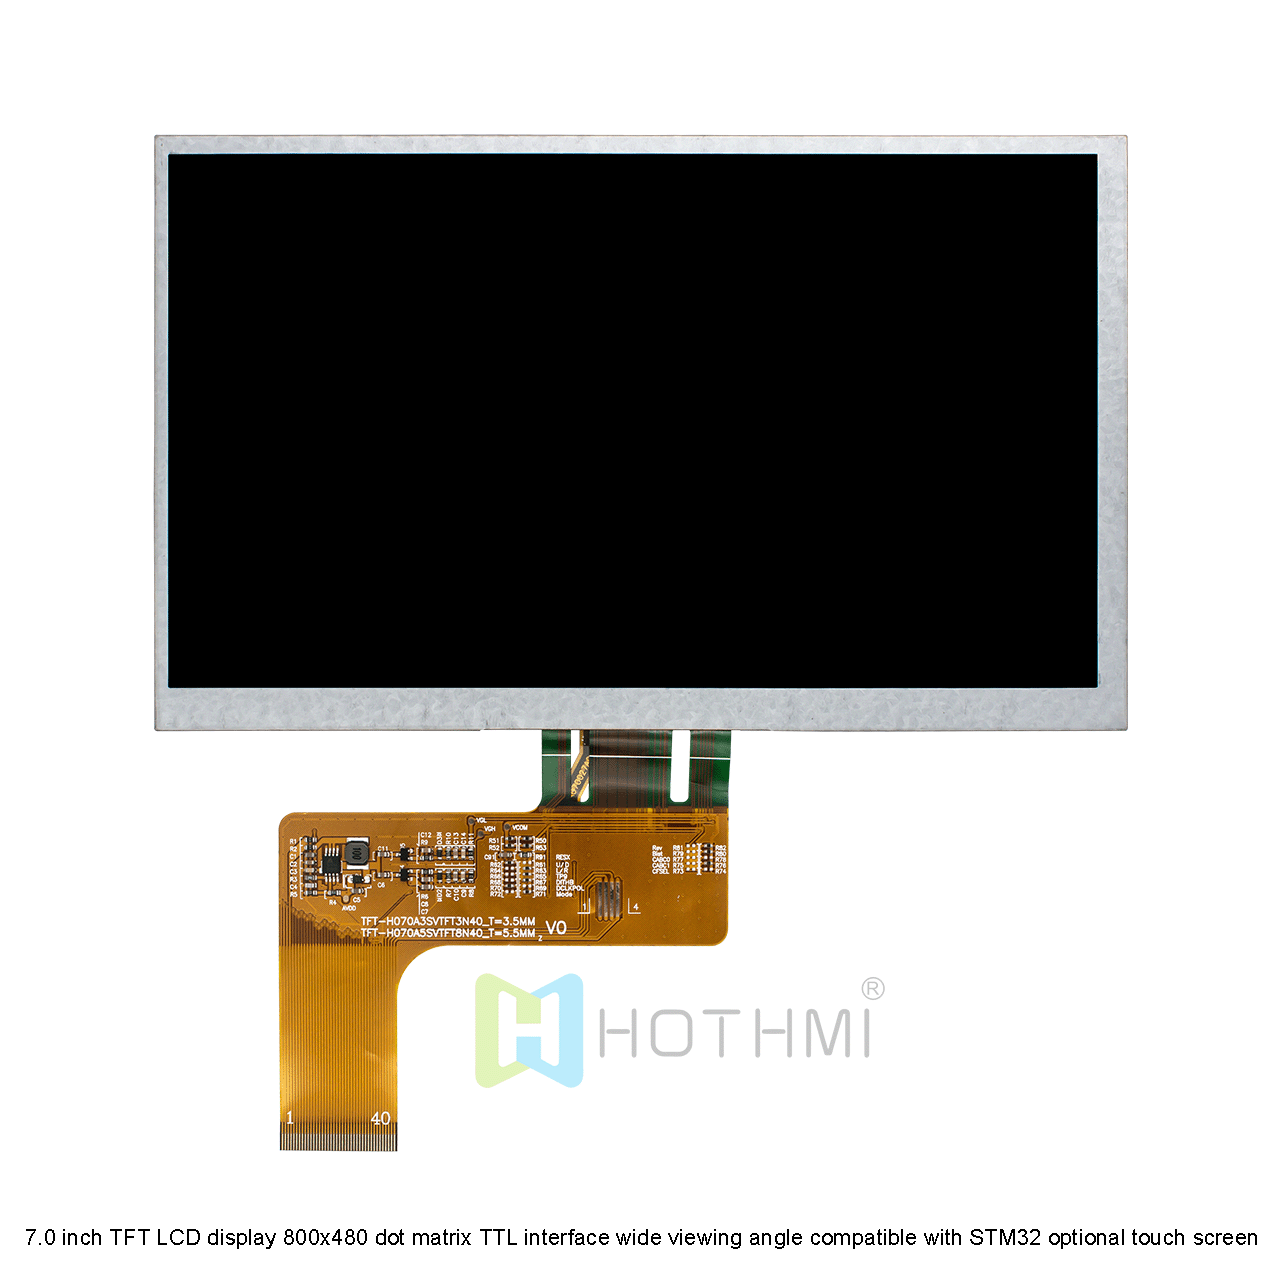 7.0 inch TFT LCD display 800x480 dot matrix TTL interface wide viewing angle compatible with STM32 optional touch screen